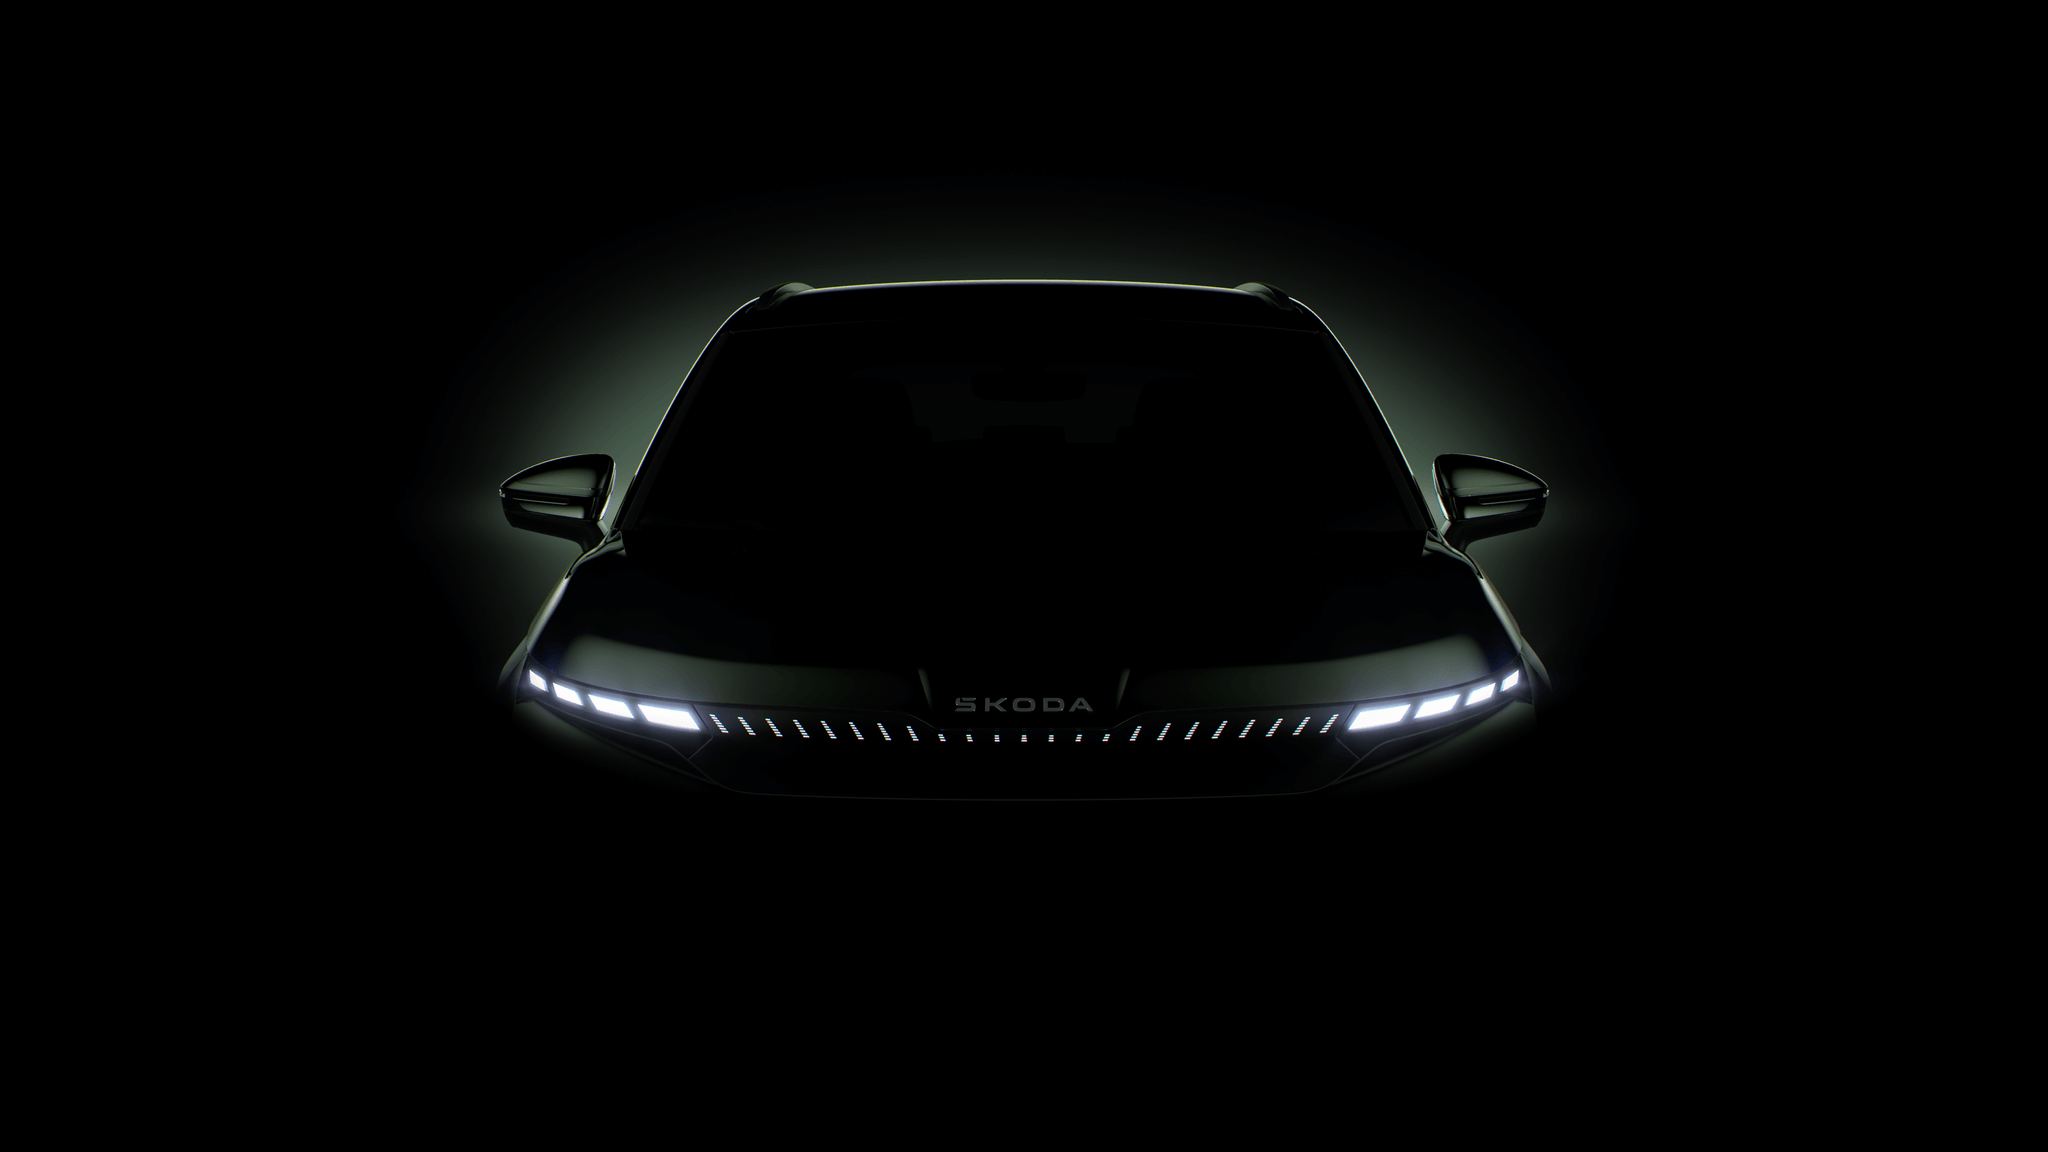 Skoda showed the first teaser of the new Elroq electric crossover